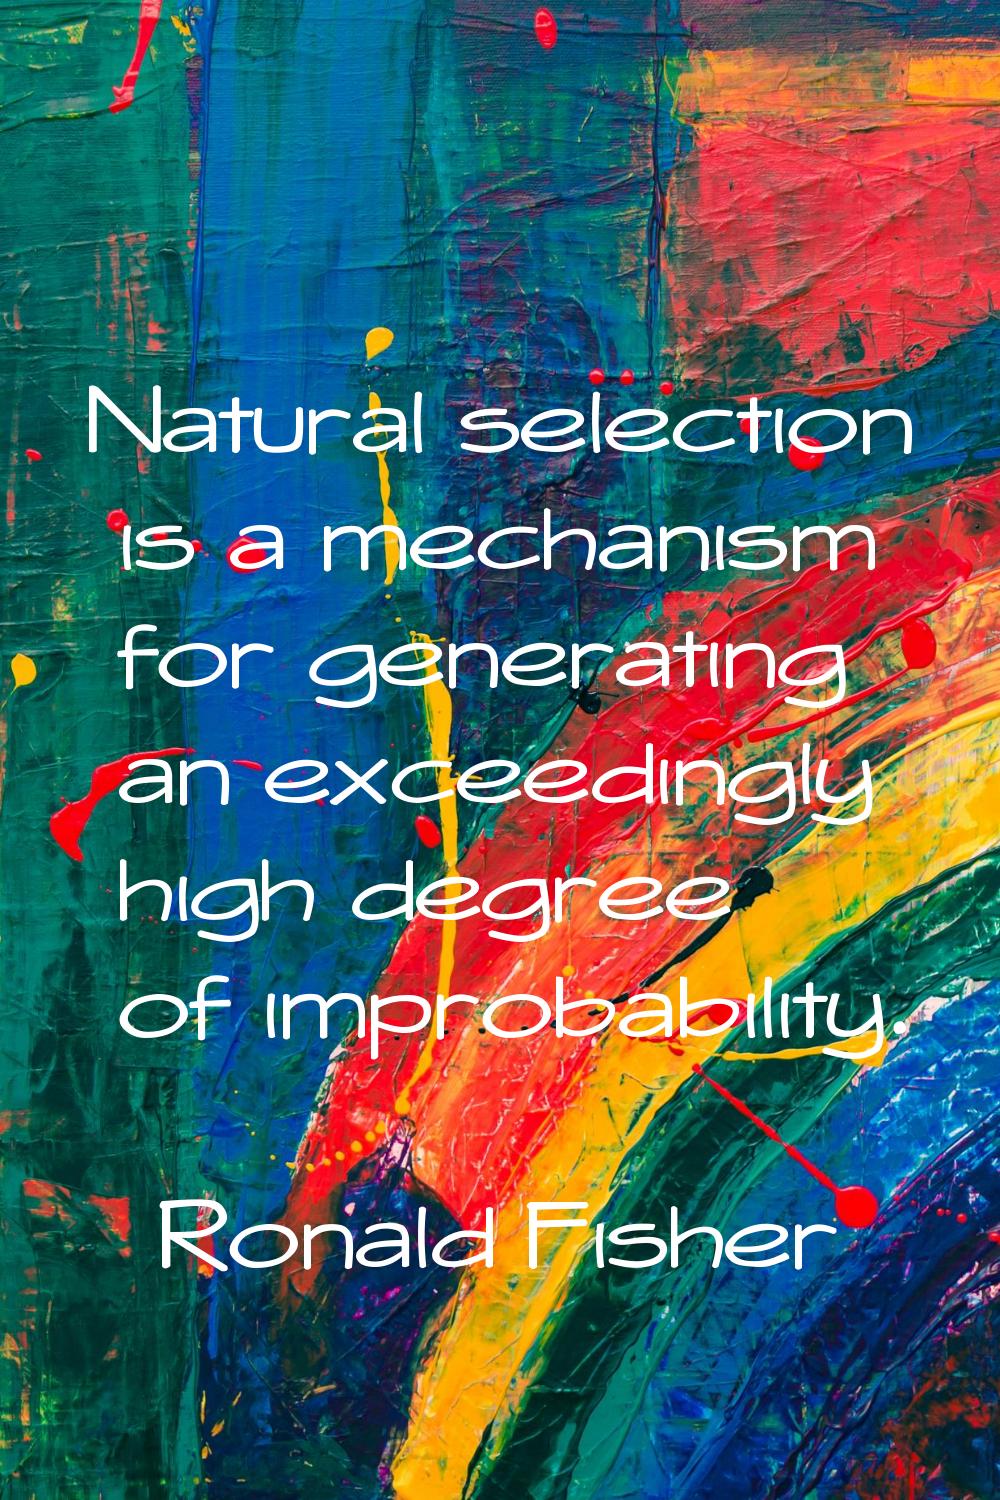 Natural selection is a mechanism for generating an exceedingly high degree of improbability.